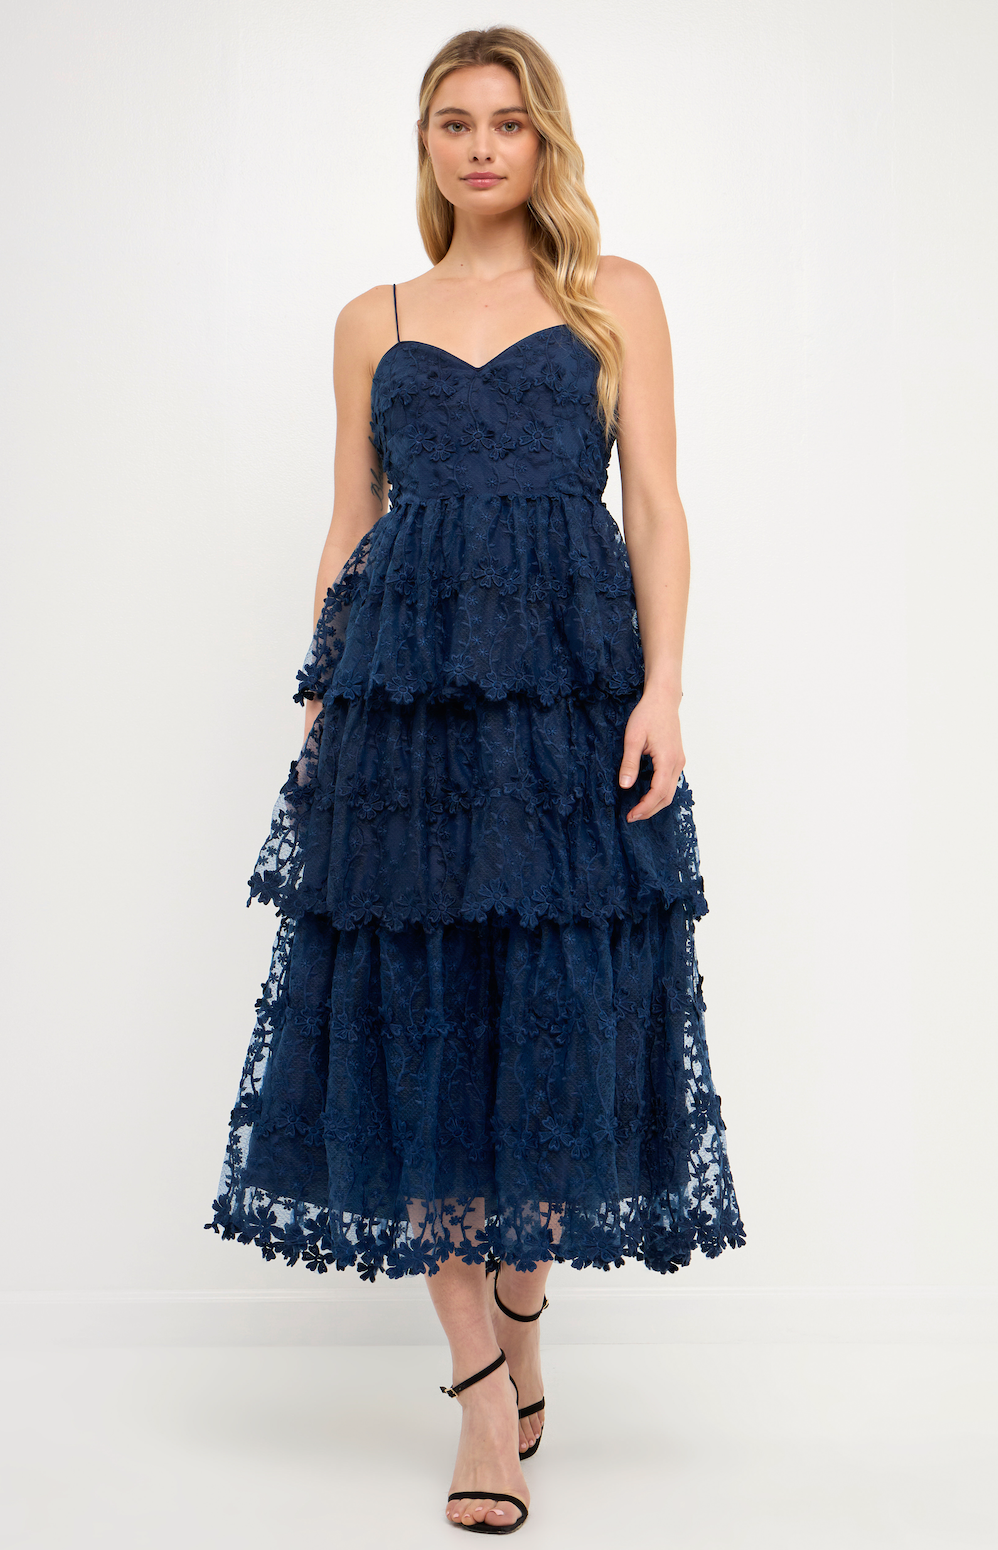 IVY LACE MIDI DRESS IN DEEP NAVY